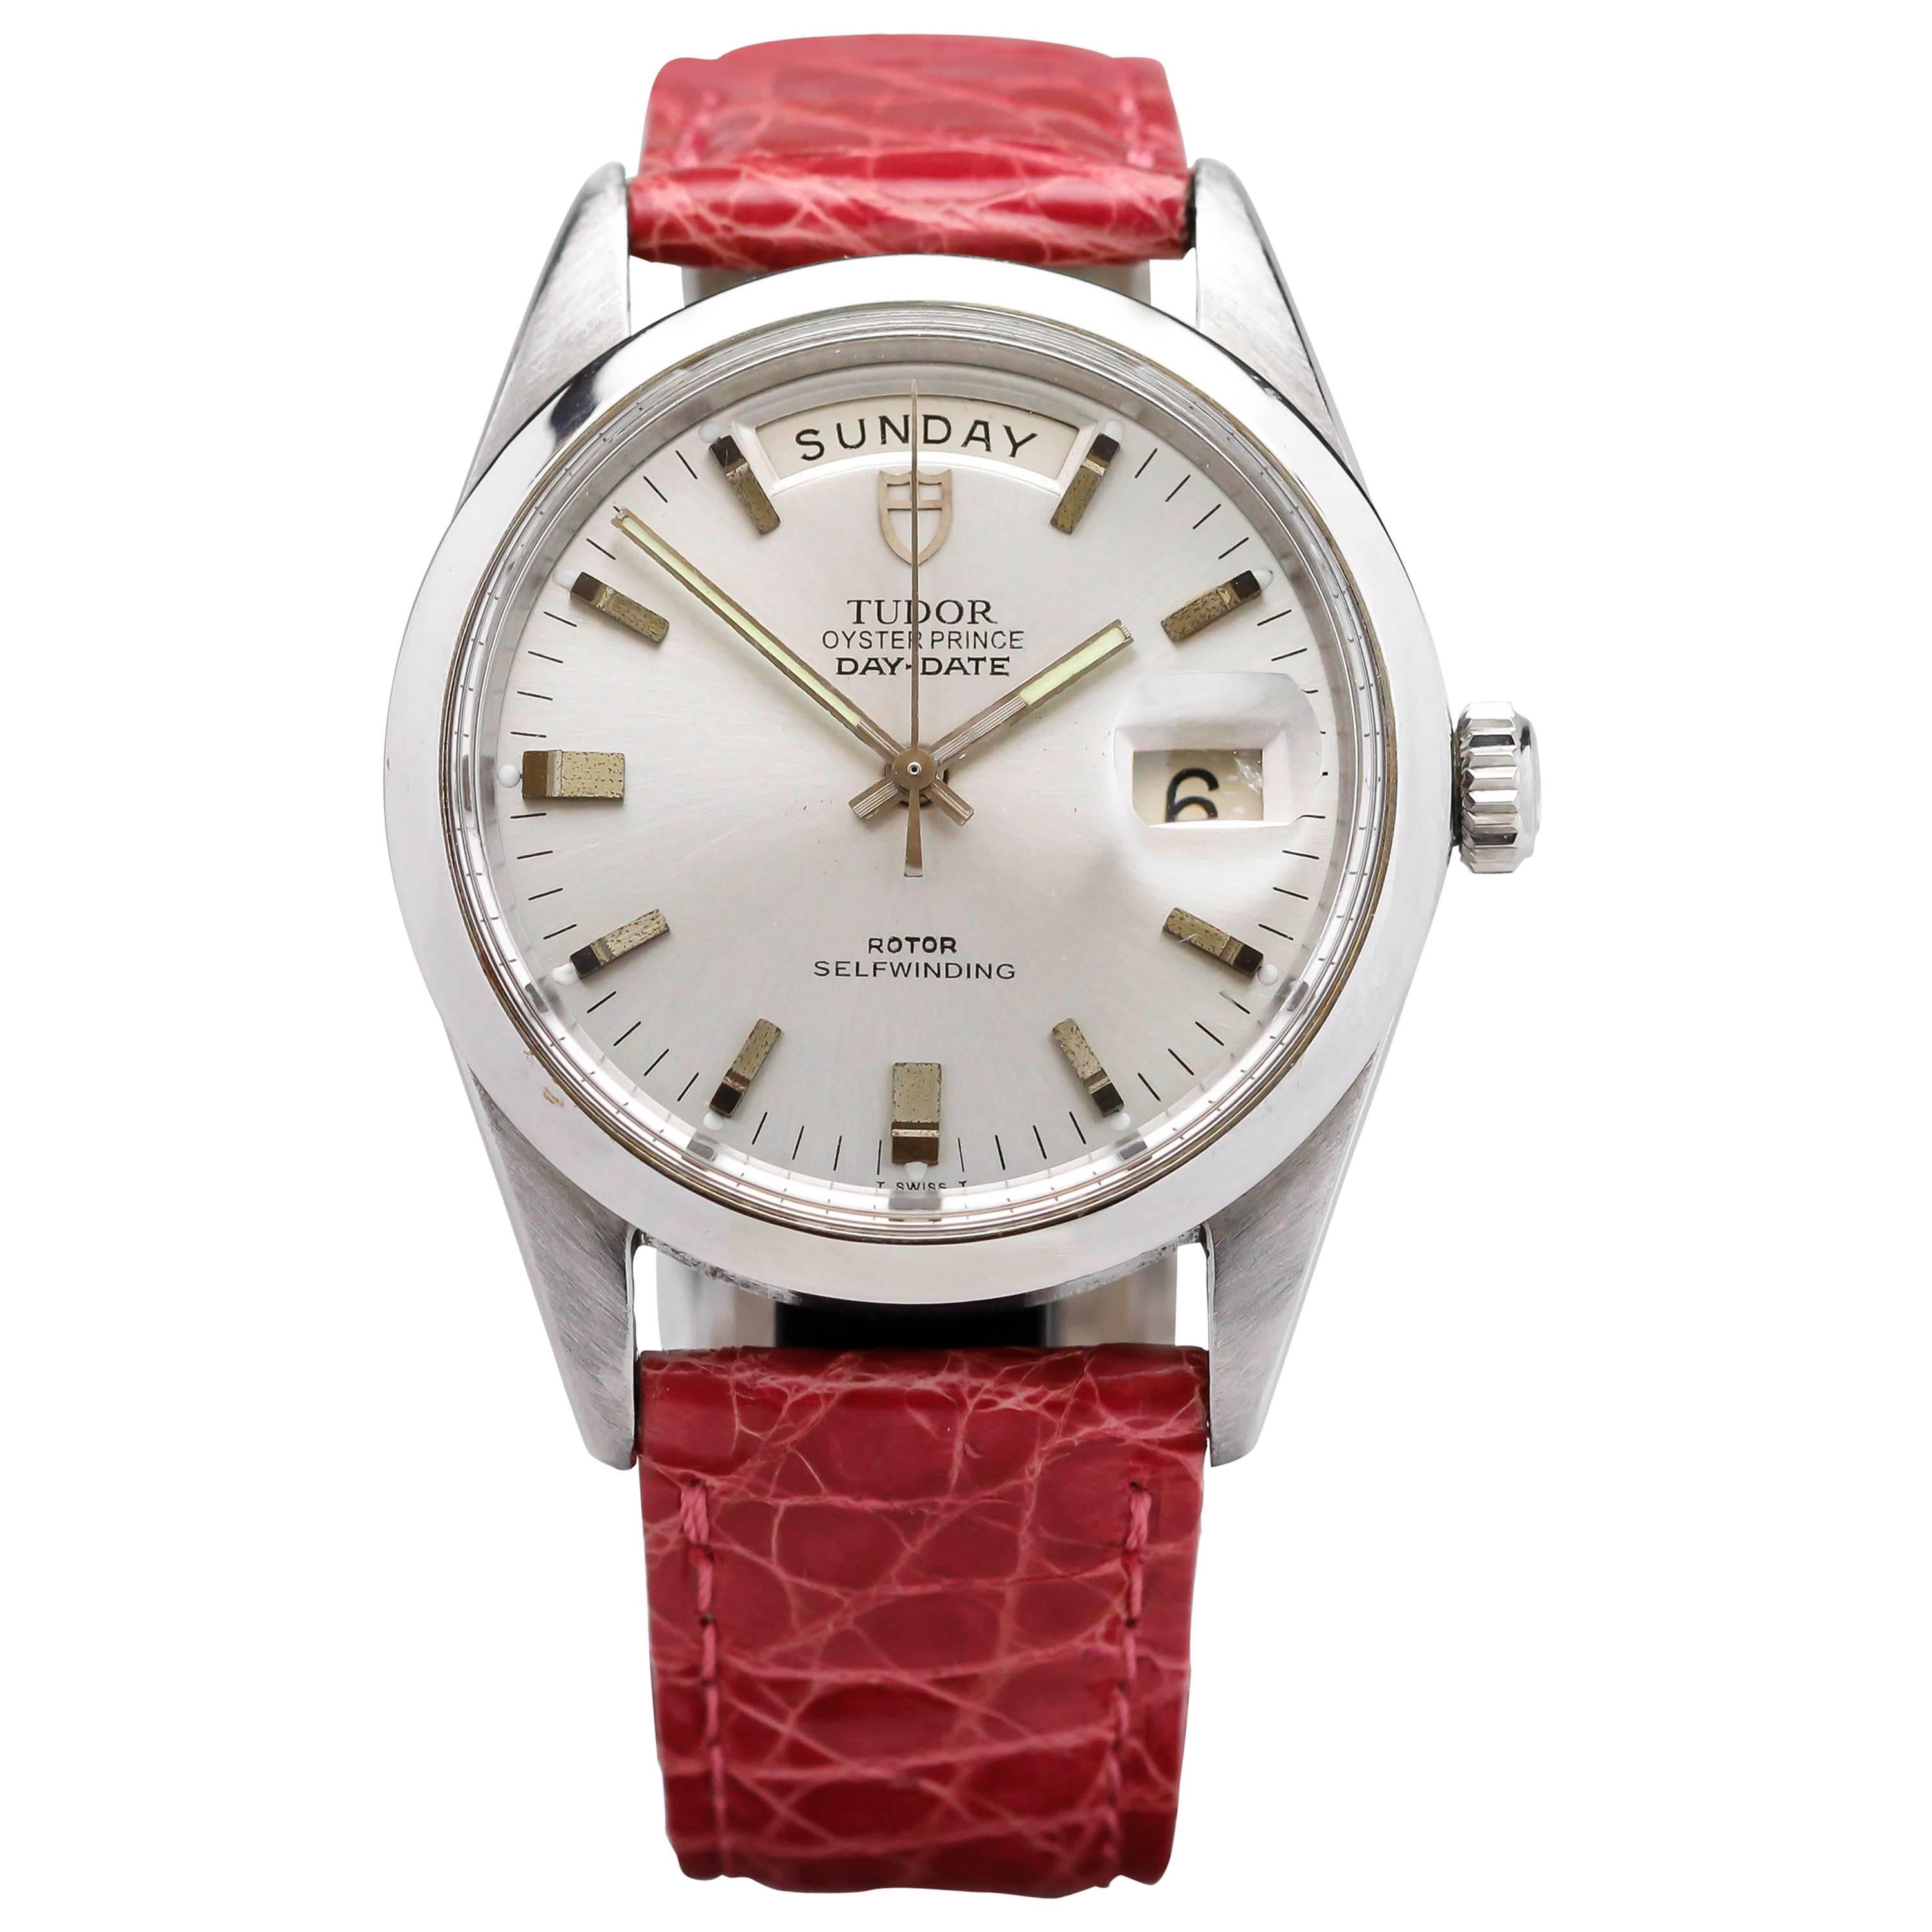 Tudor Stainless Steel Oyster Prince Date+Day Ref 7017/0